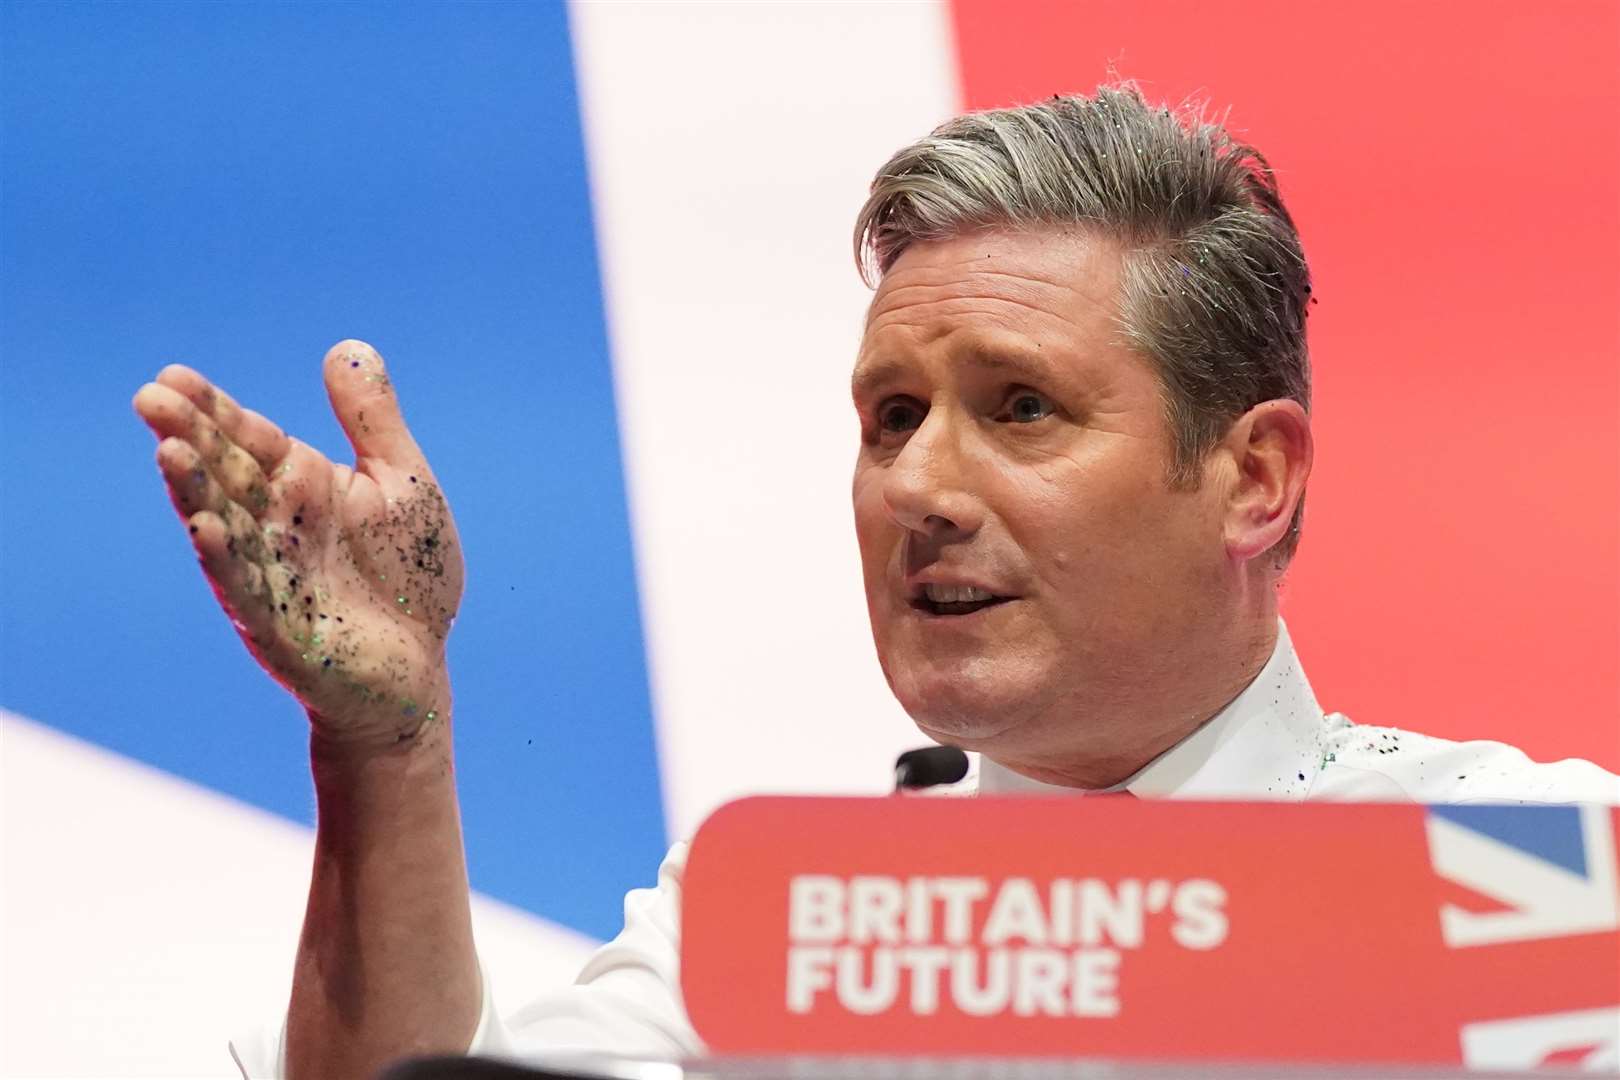 Labour leader Sir Keir Starmer is set to visit Port Talbot (Stefan Rousseau/PA)